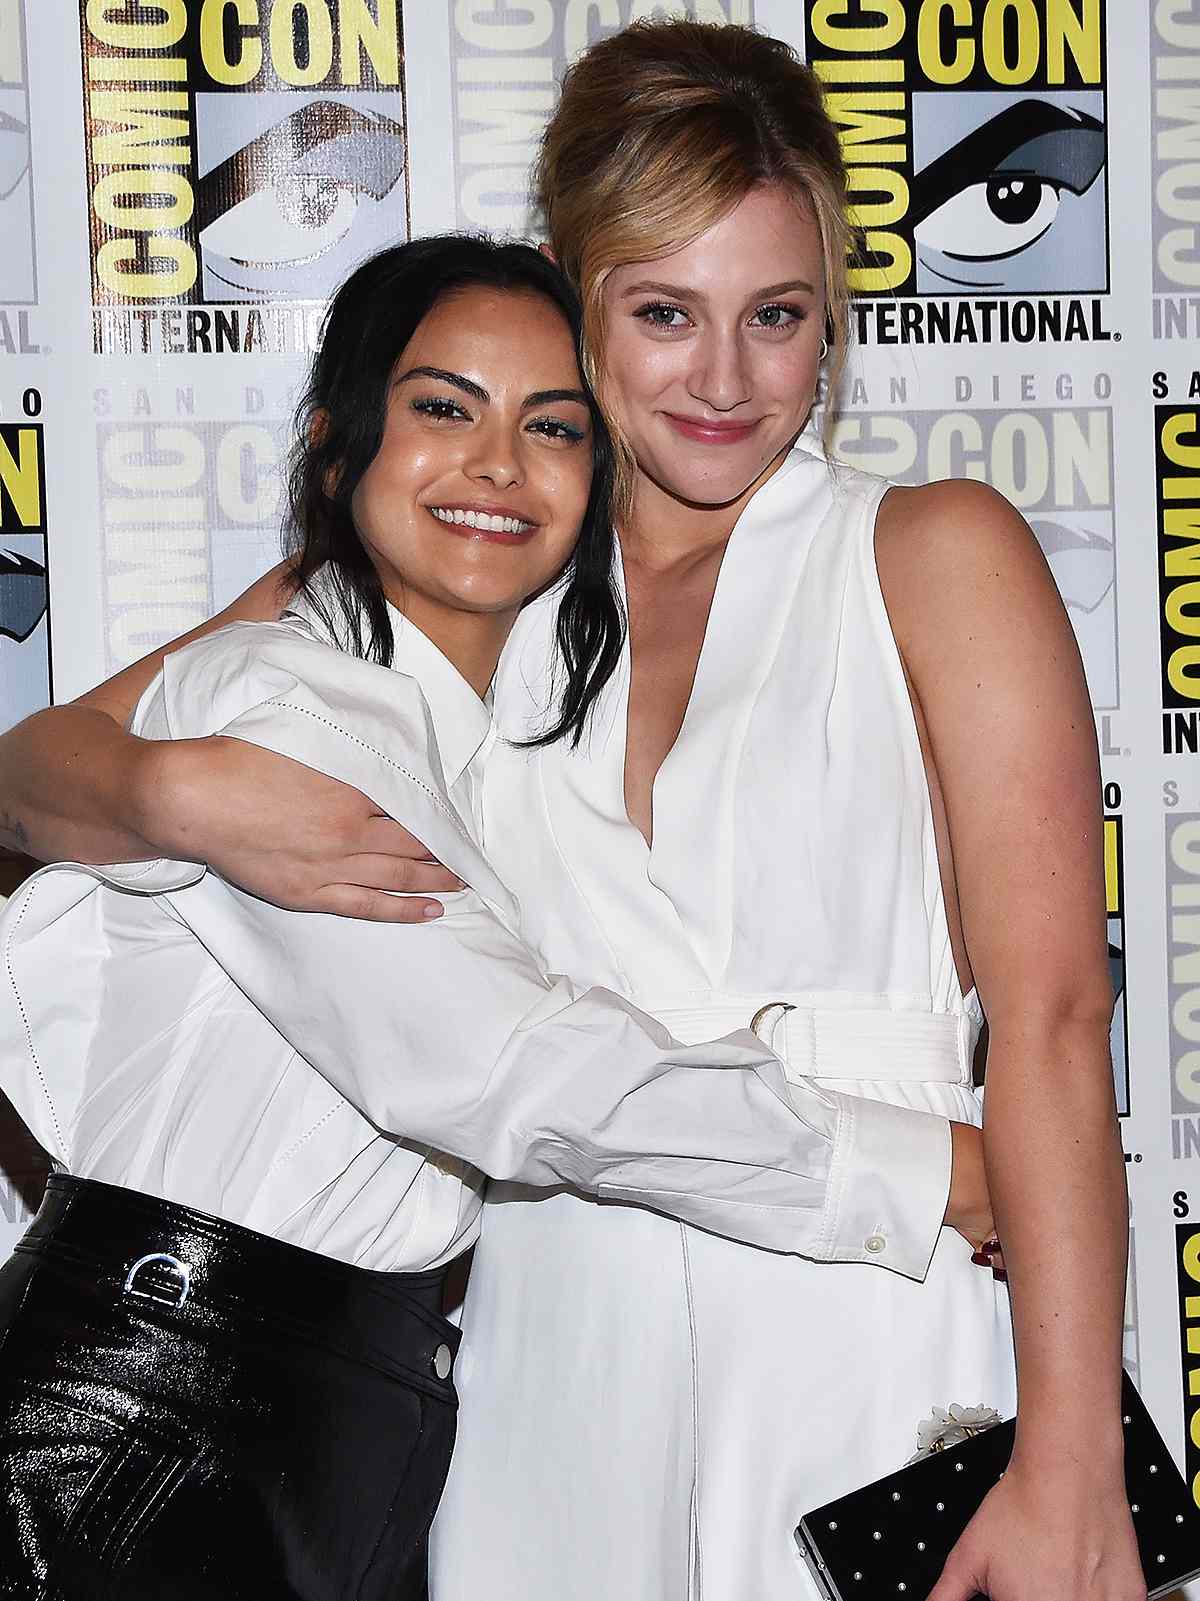 Actress Camila Mendes (L) and Lili Reinhart arrive for the press line of "Riverdale" at Comic Con in San Diego, July 21, 2018.